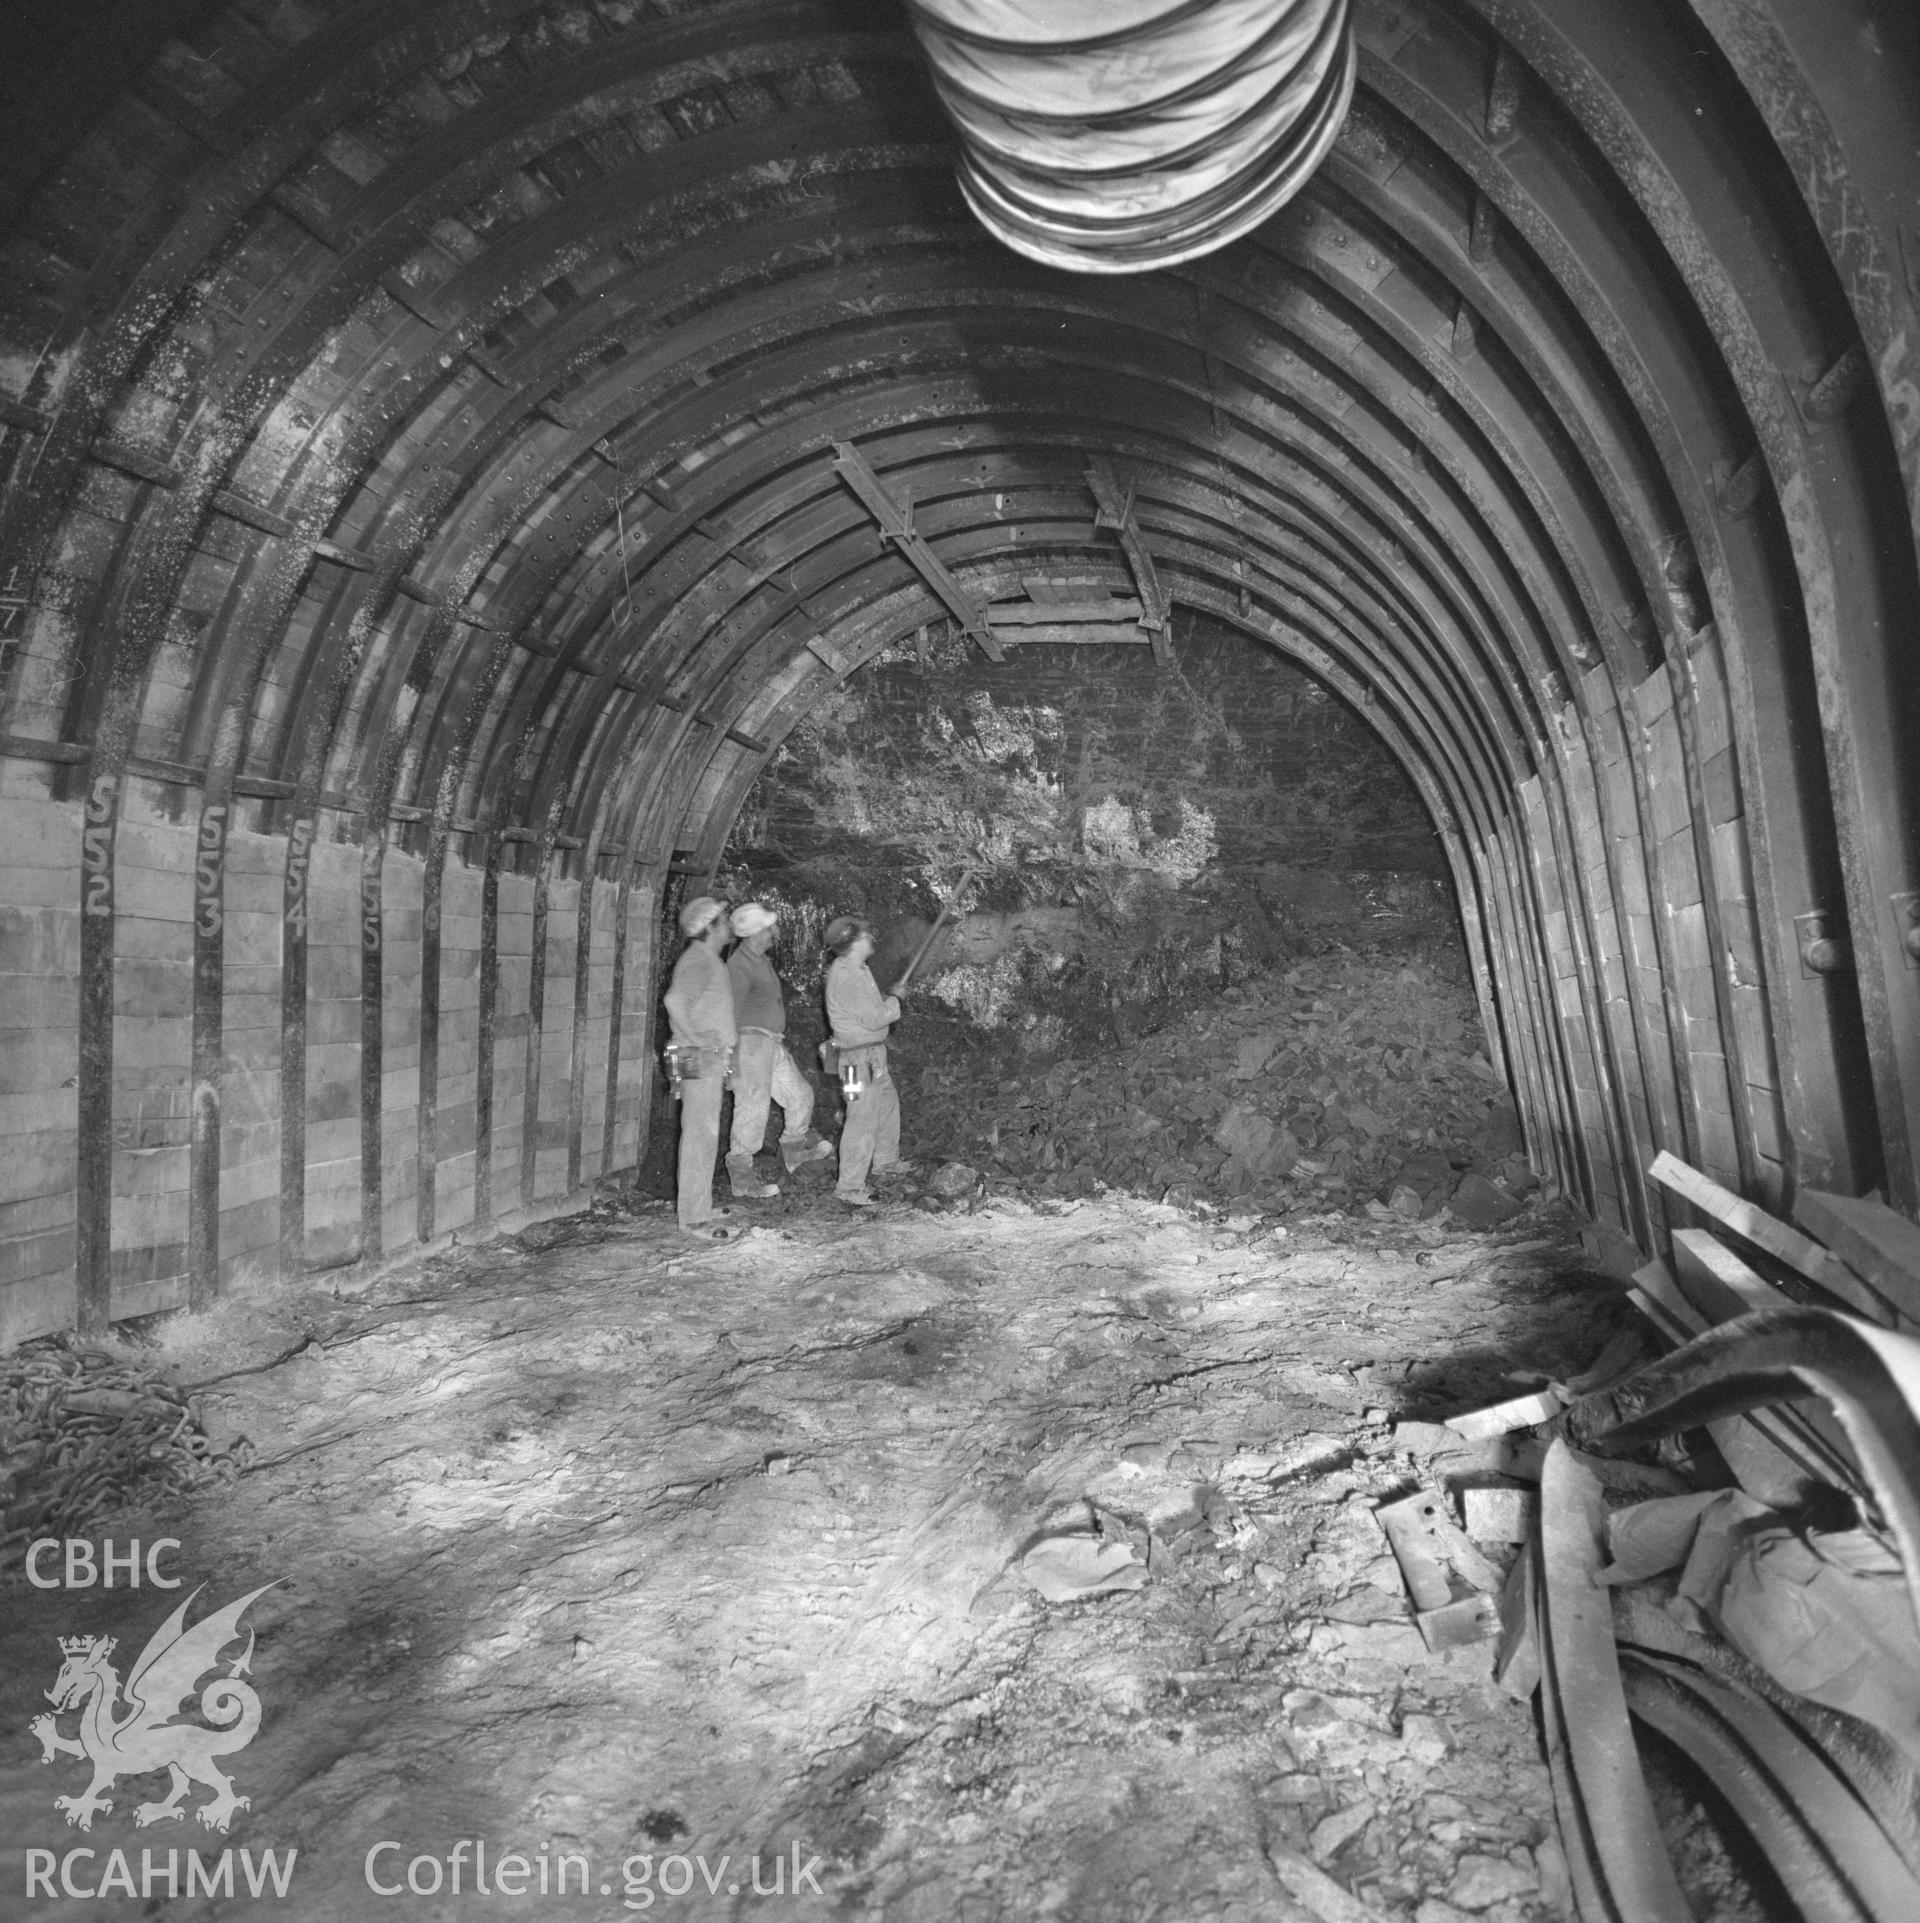 Digital copy of an acetate negative showing face of a new heading at Taff Colliery, from the John Cornwell Collection.